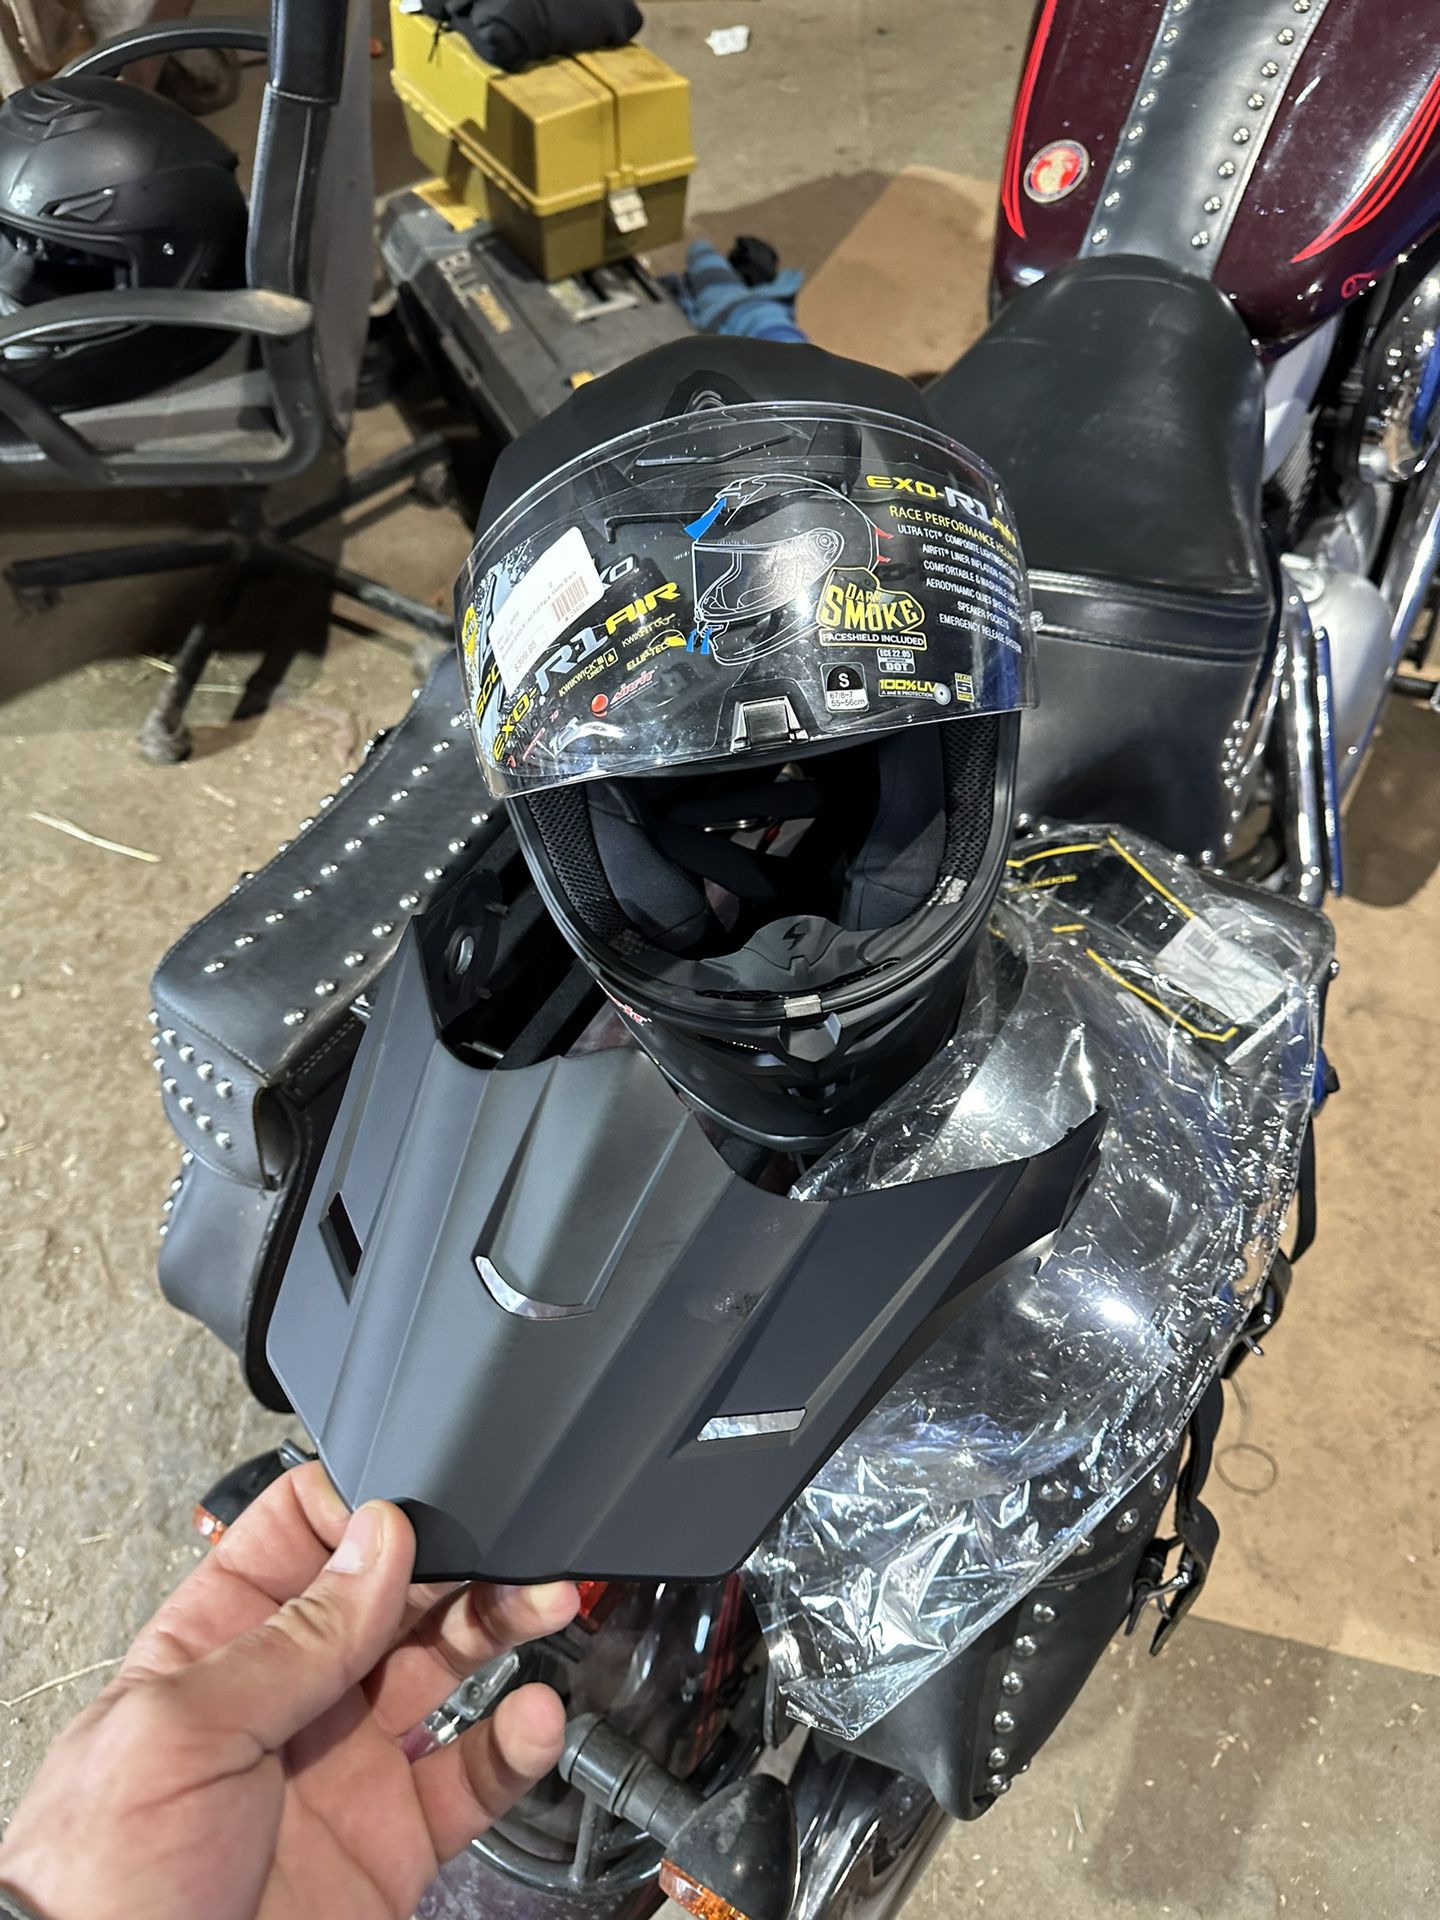 New Small Size Motorcycle Helmets 